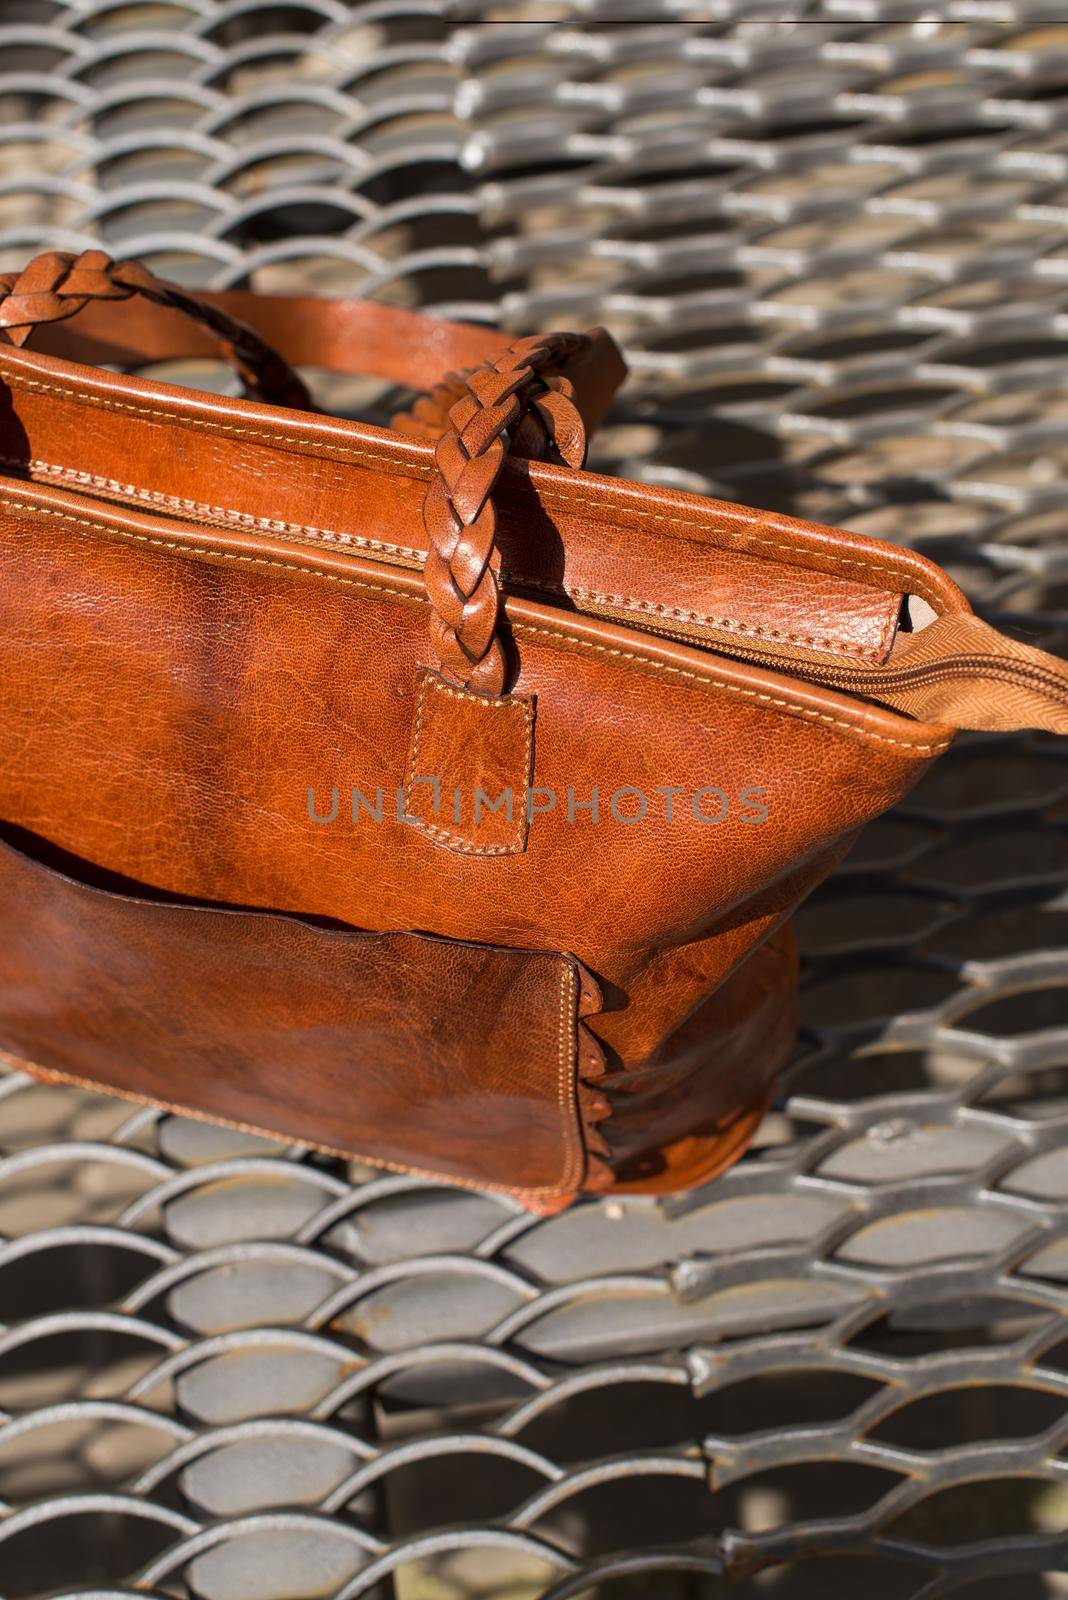 close-up photo of orange leather bag on a metal texture background. outdoor photo